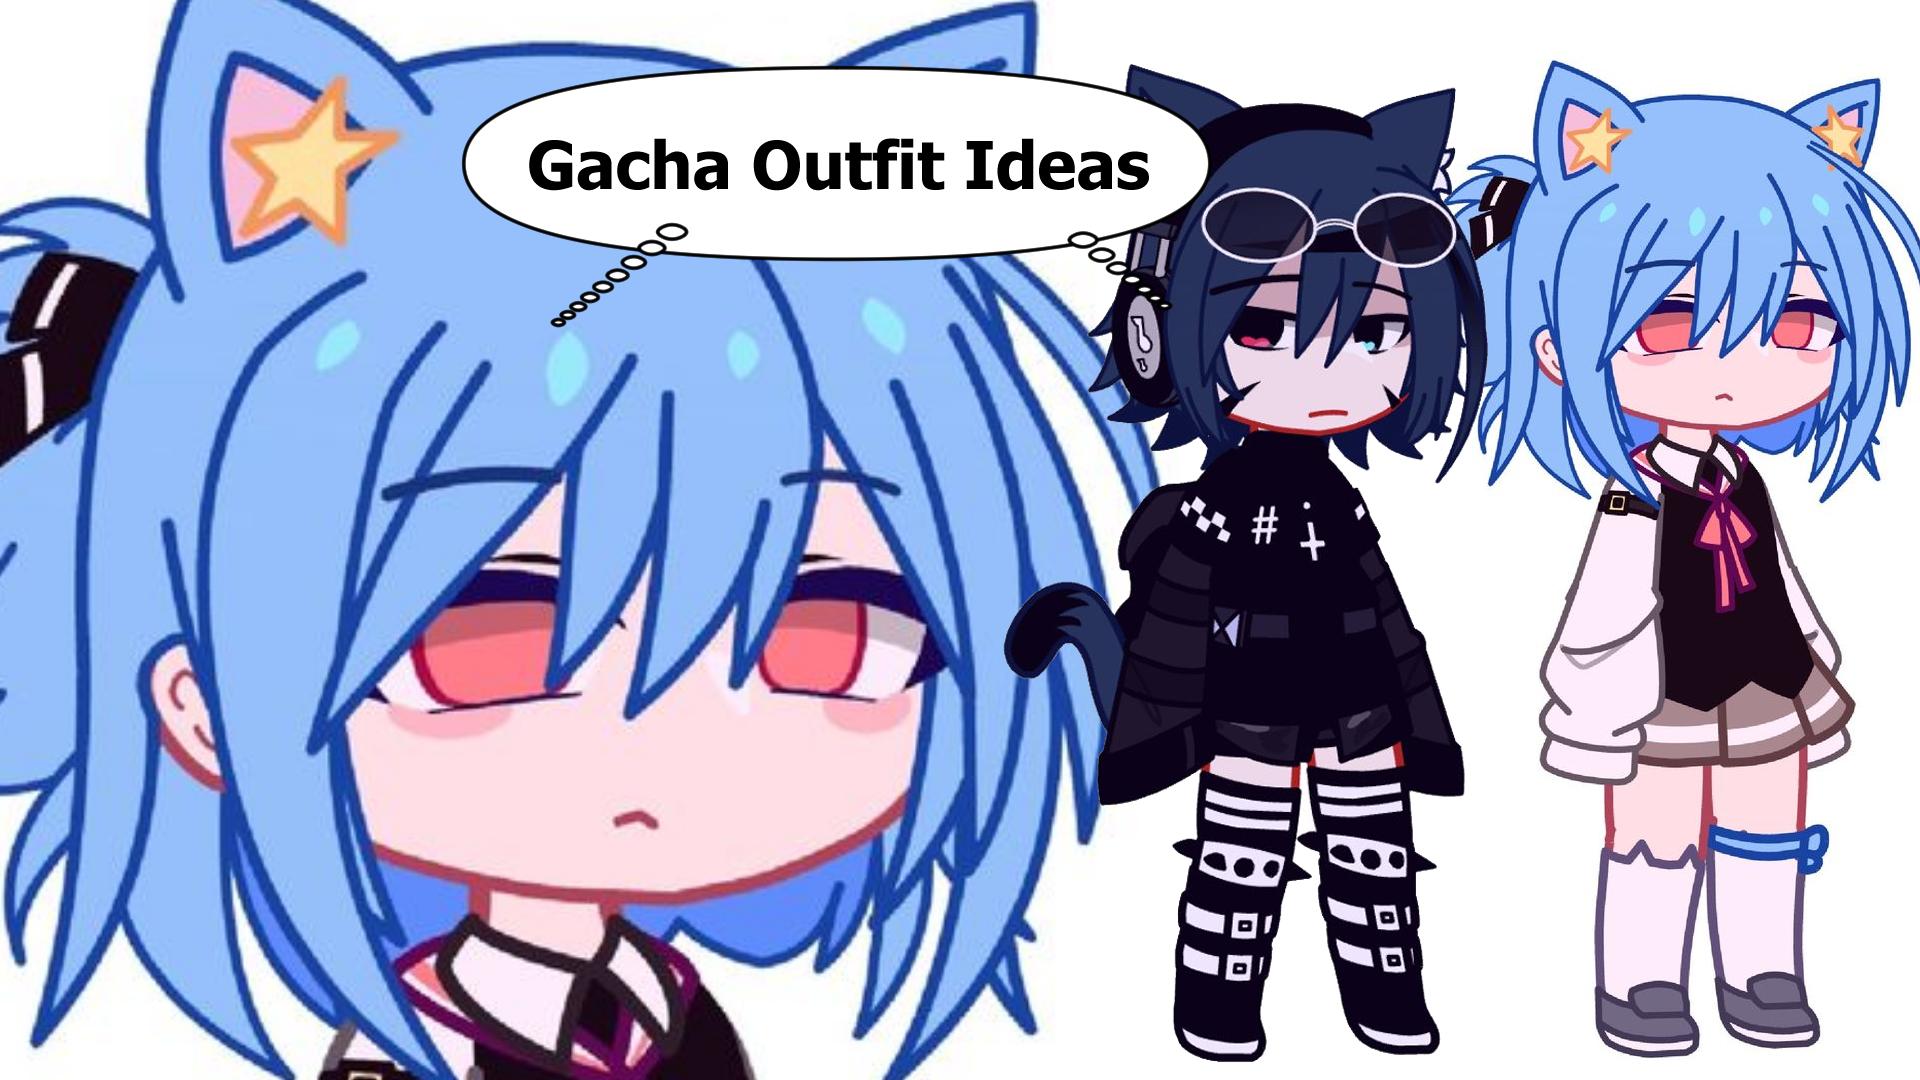 outfit ideas for gacha life - Google Search